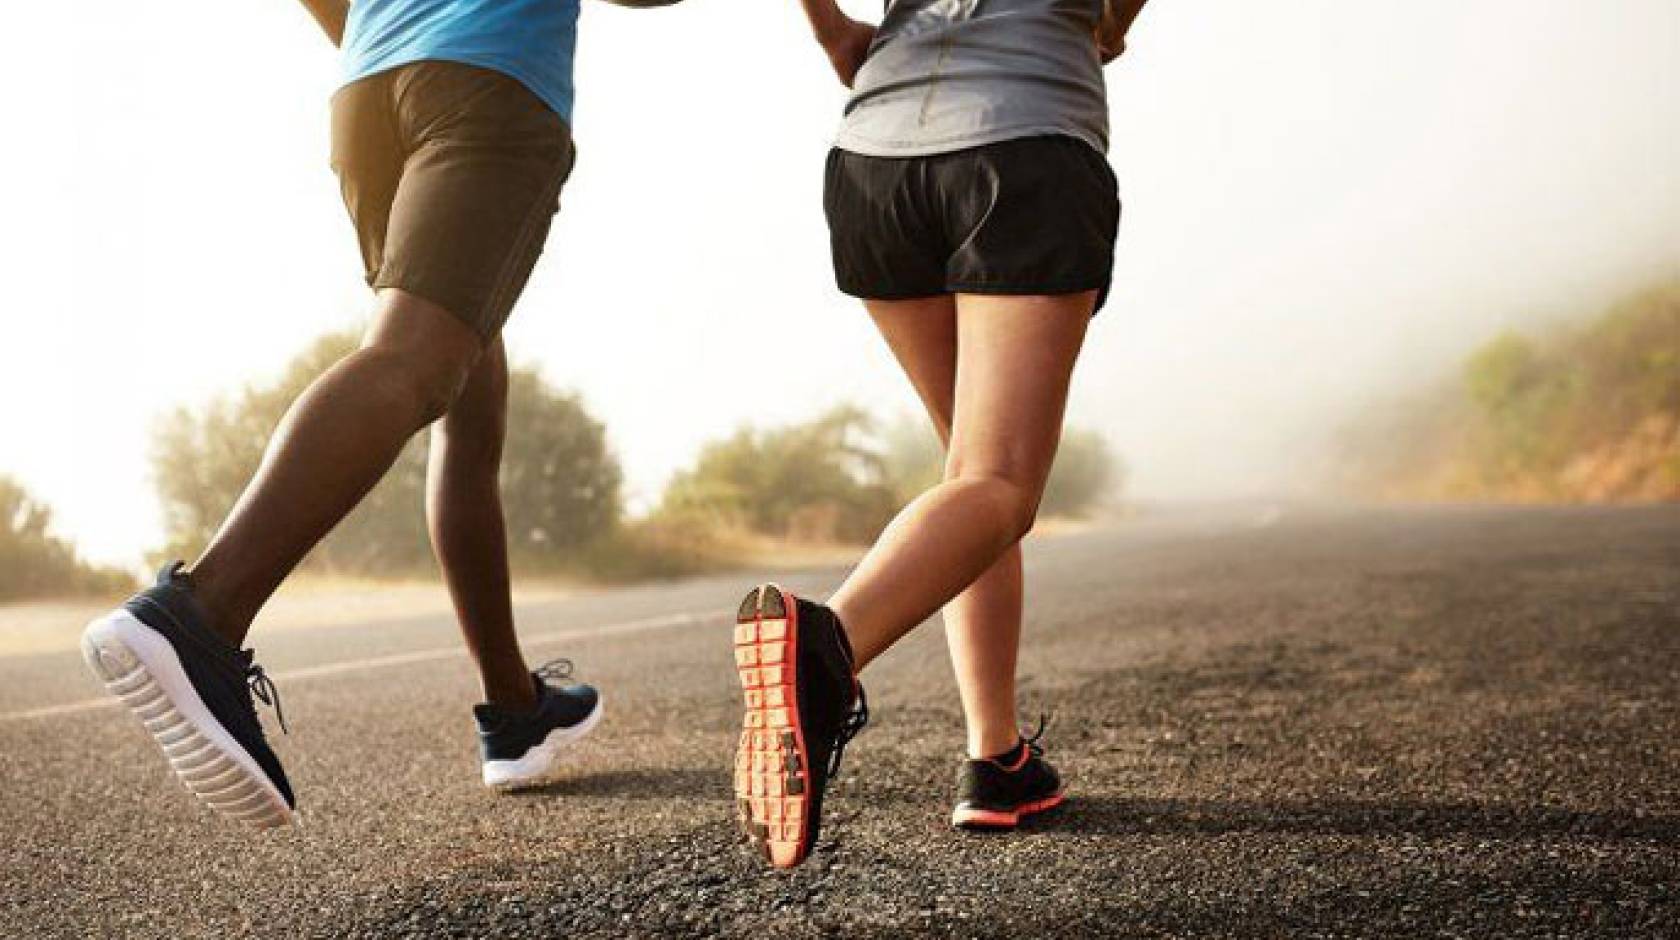 Man and woman jogging together